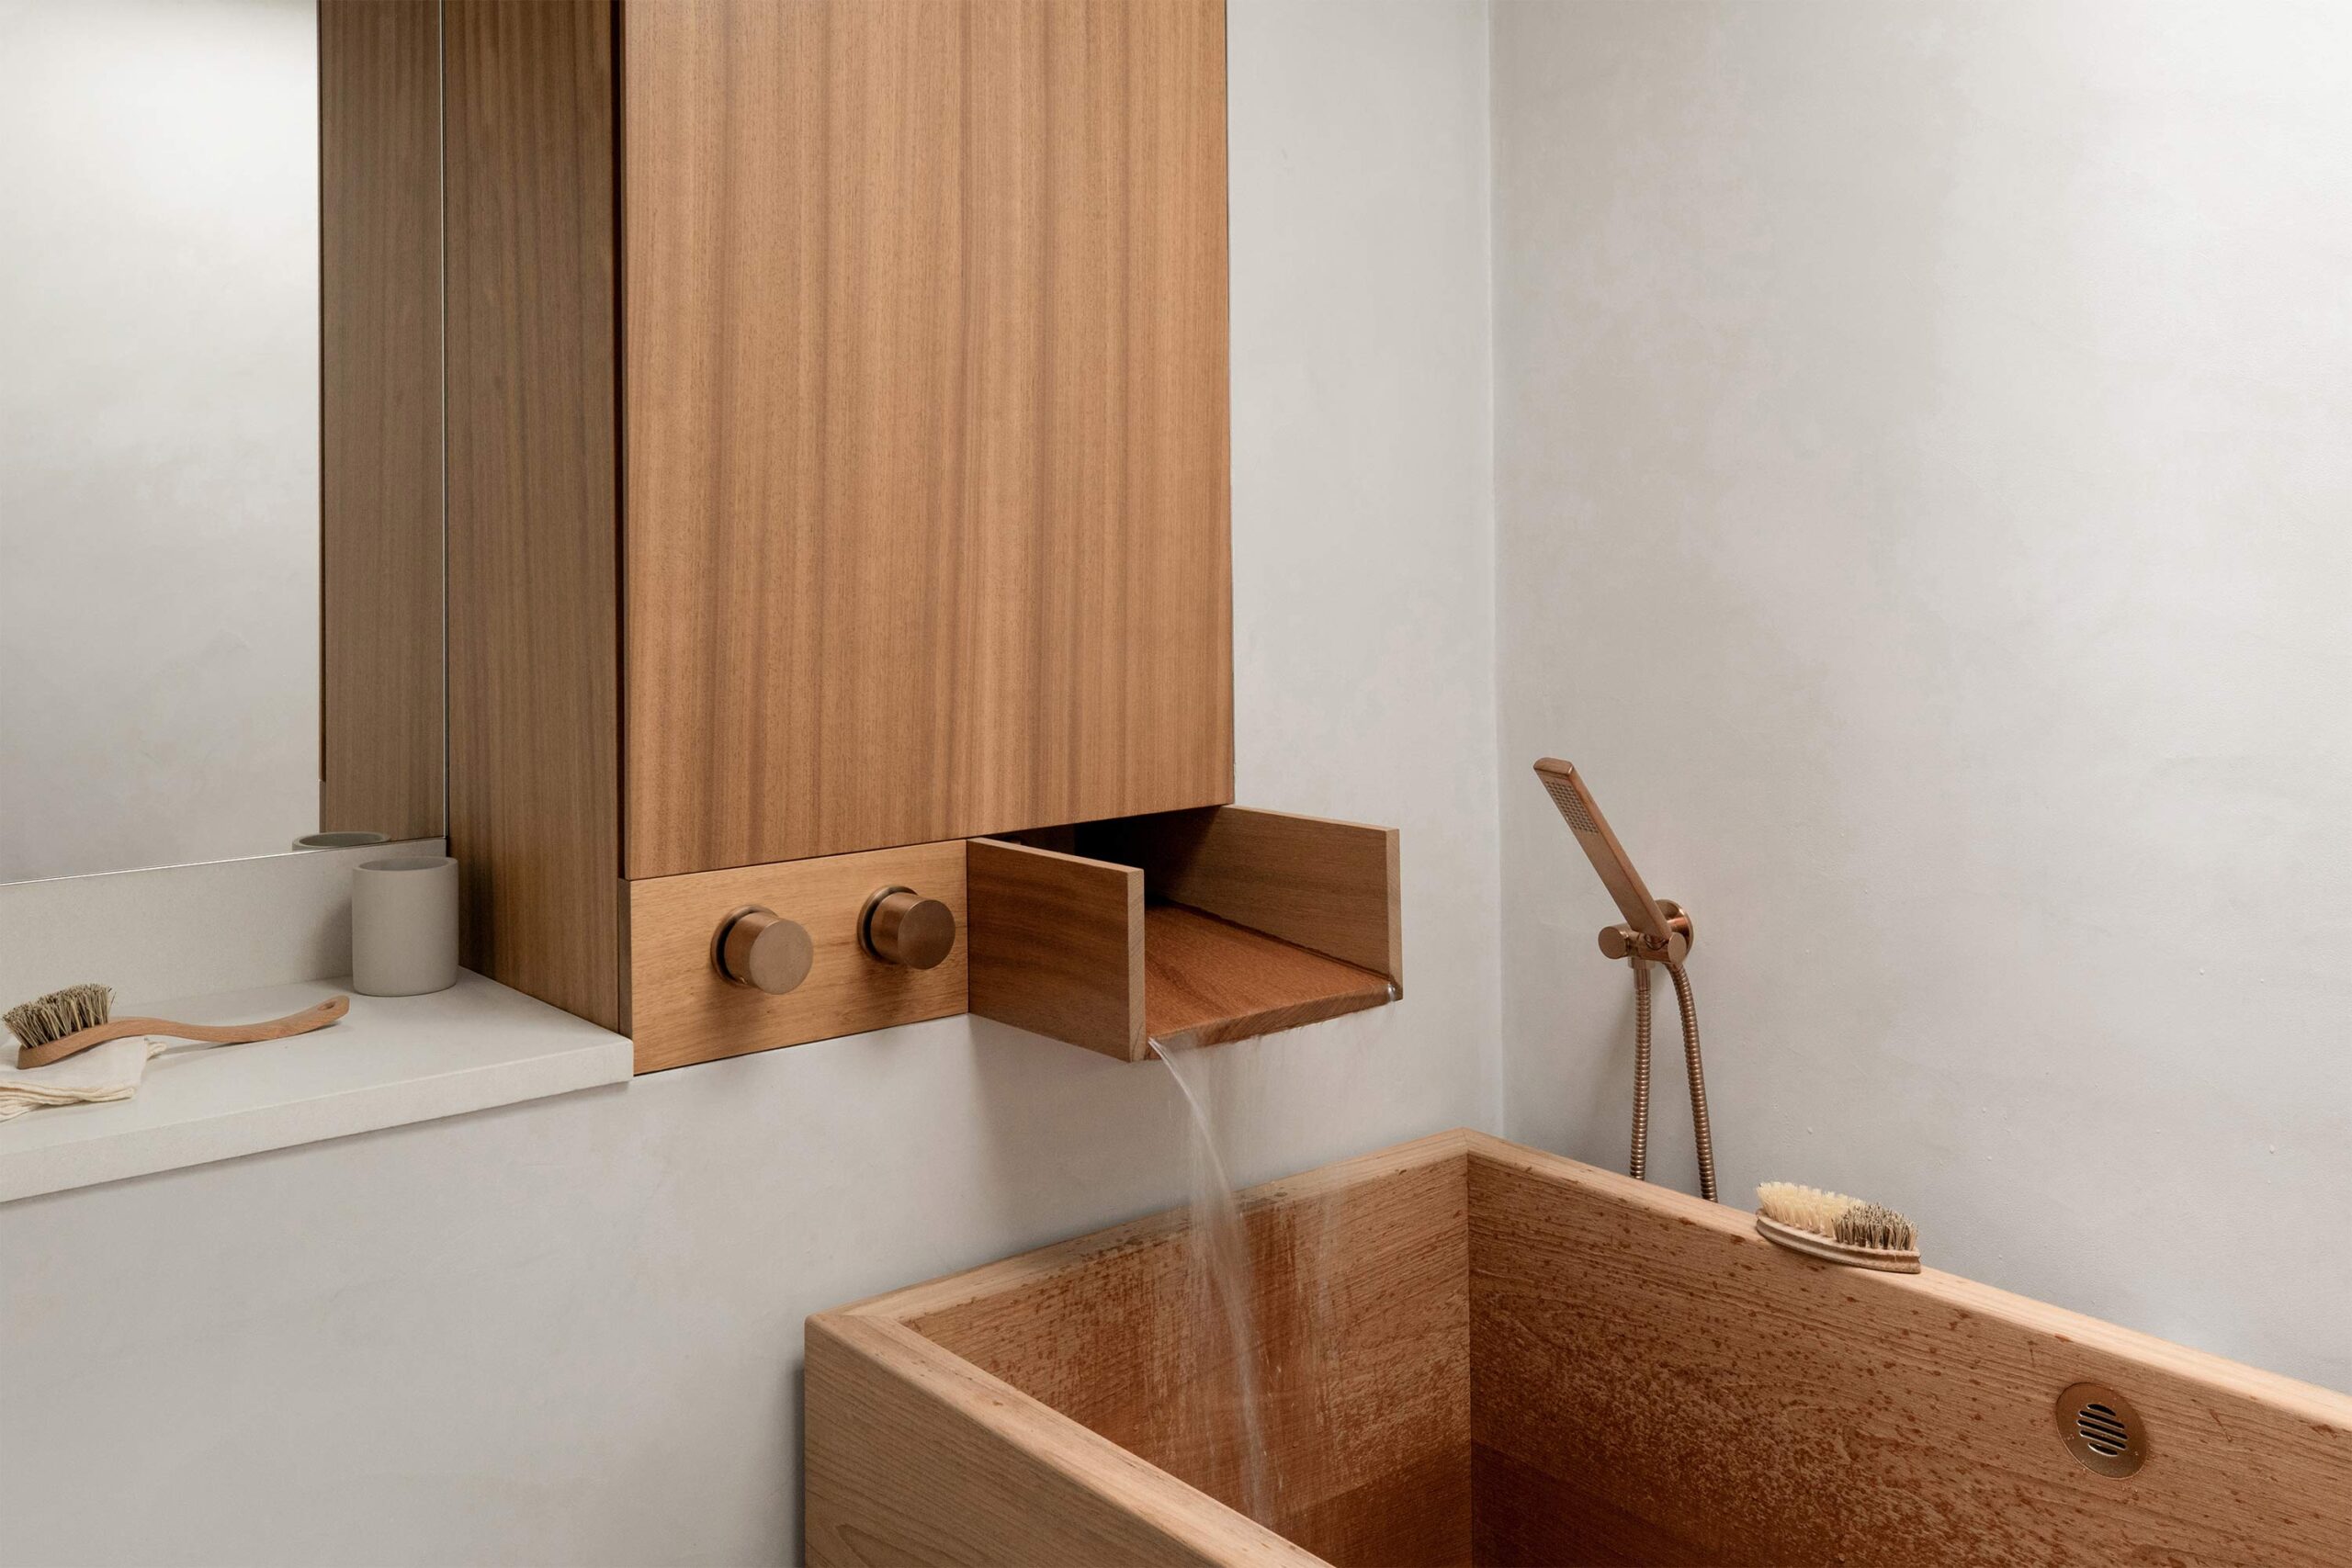  A Japanese furo bath and tap. 